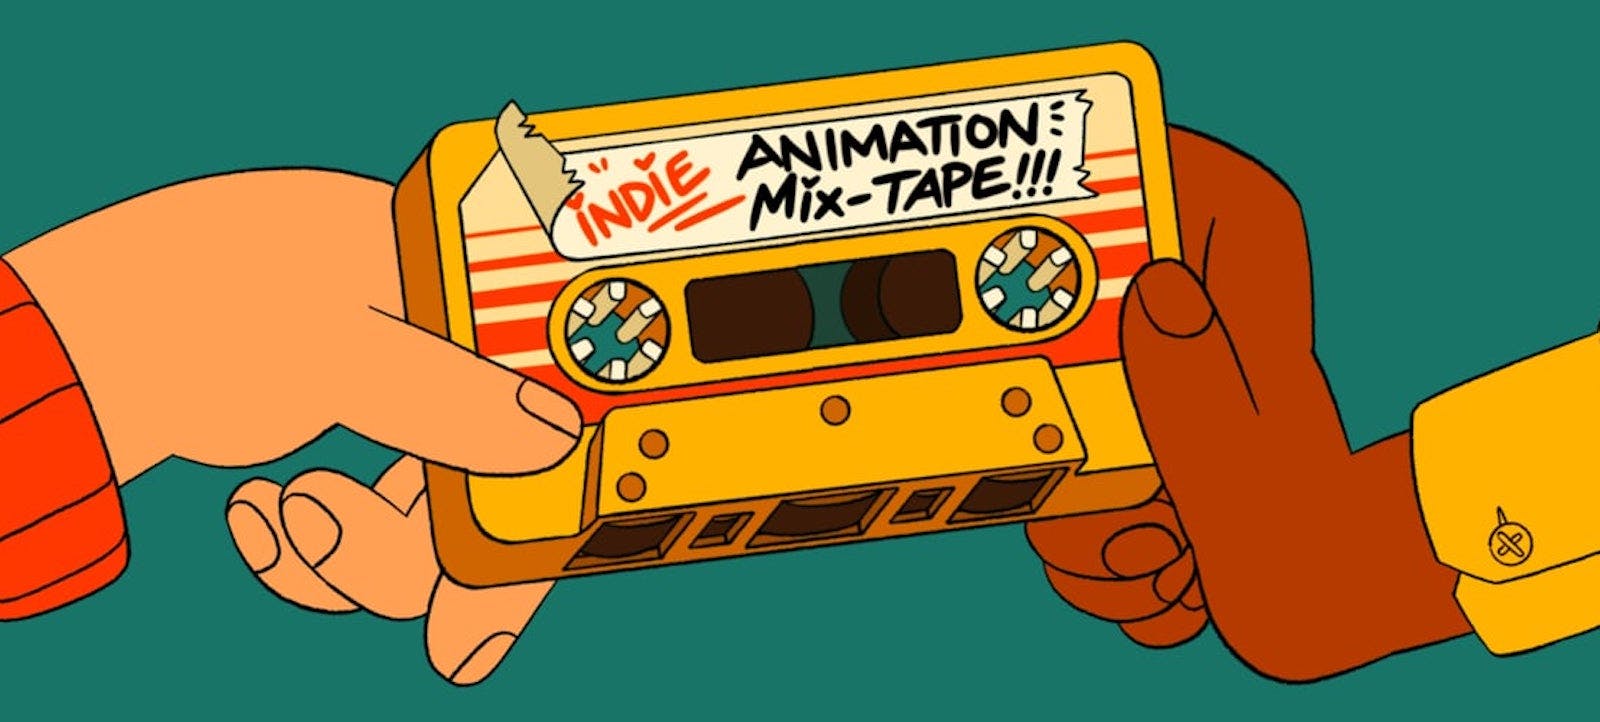 Two animators pass a tape labeled 'Indie Animation Mix-Tape!!!' between each other